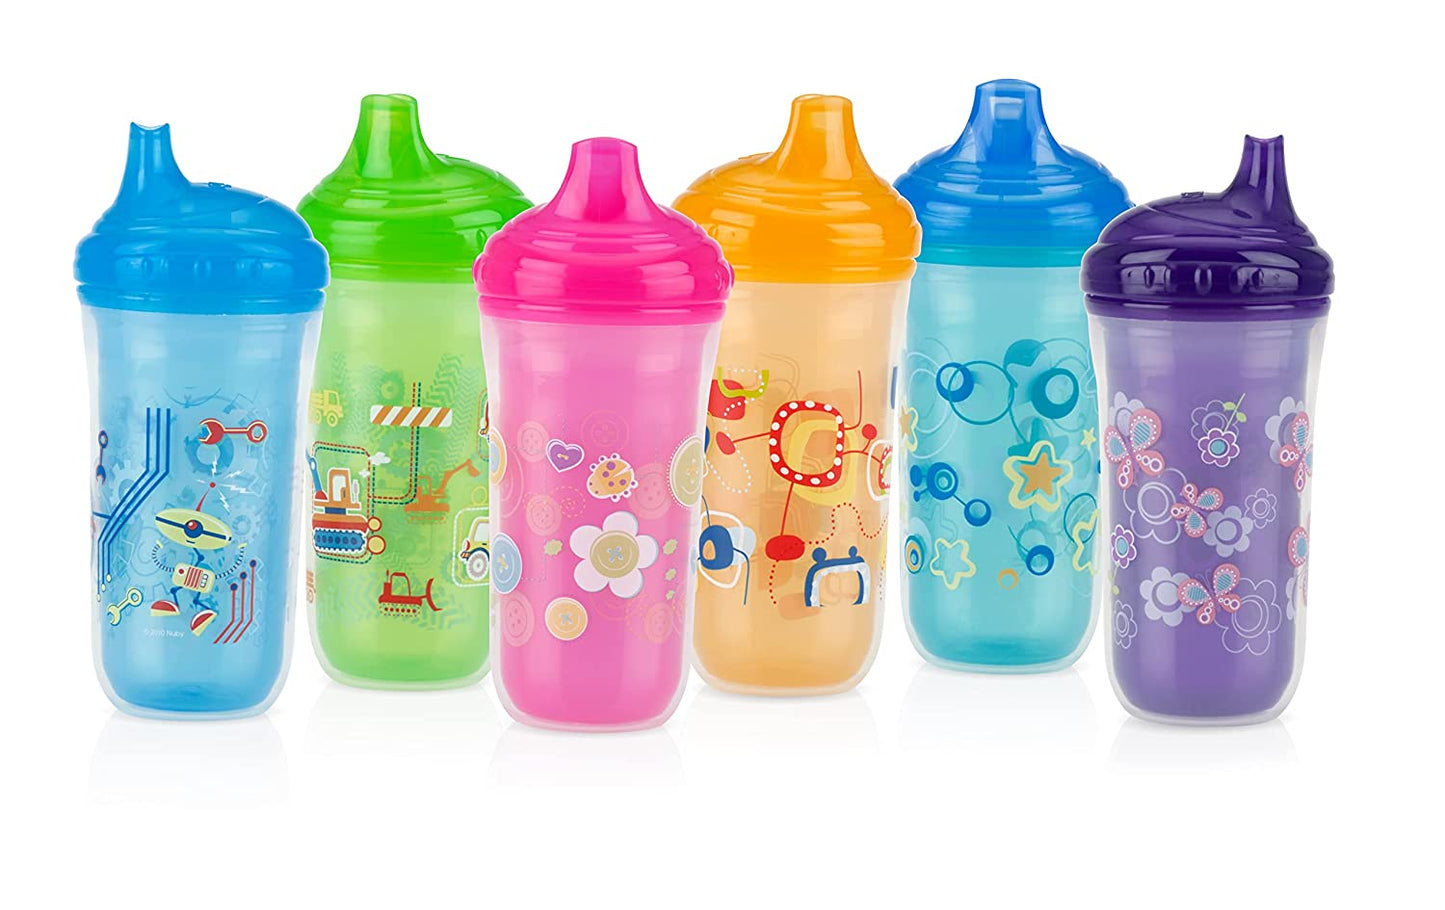 Nuby No-Spill Insulated Hard Spout 9 oz Cup, Colors/ Prints May Vary